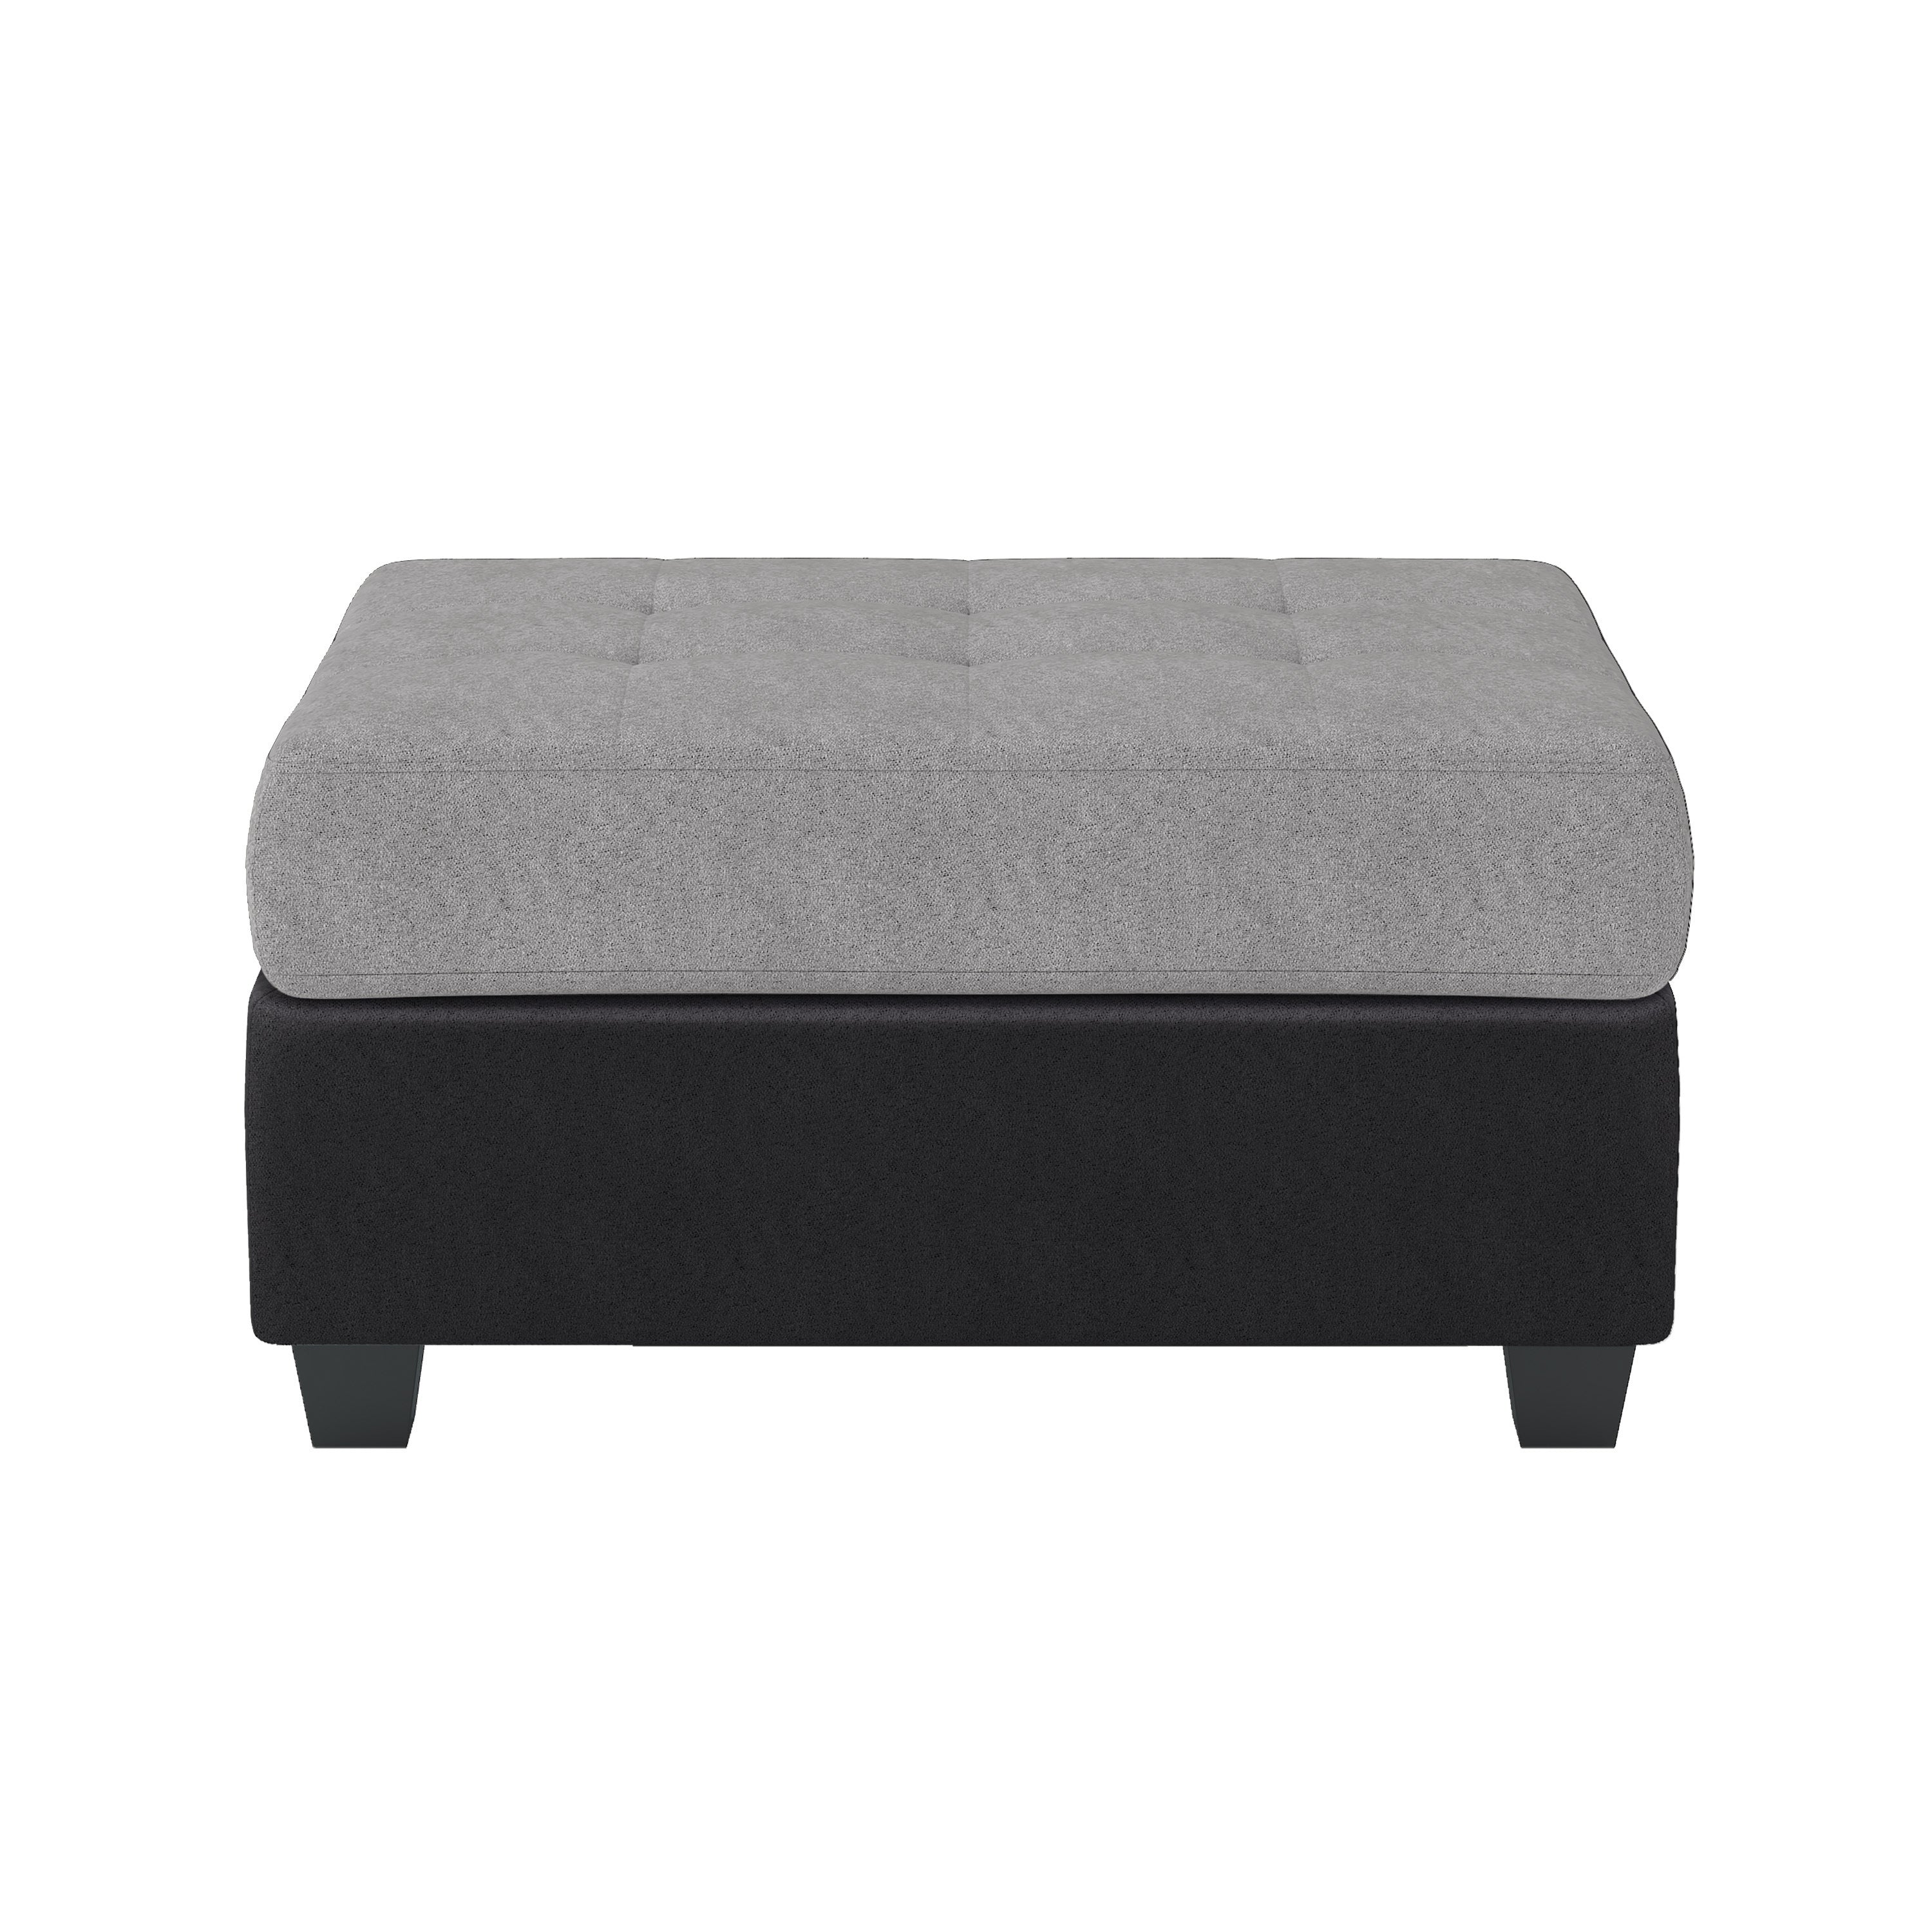 Maxine 3-piece Reversible Sectional w/ Ottoman in Gray & Black